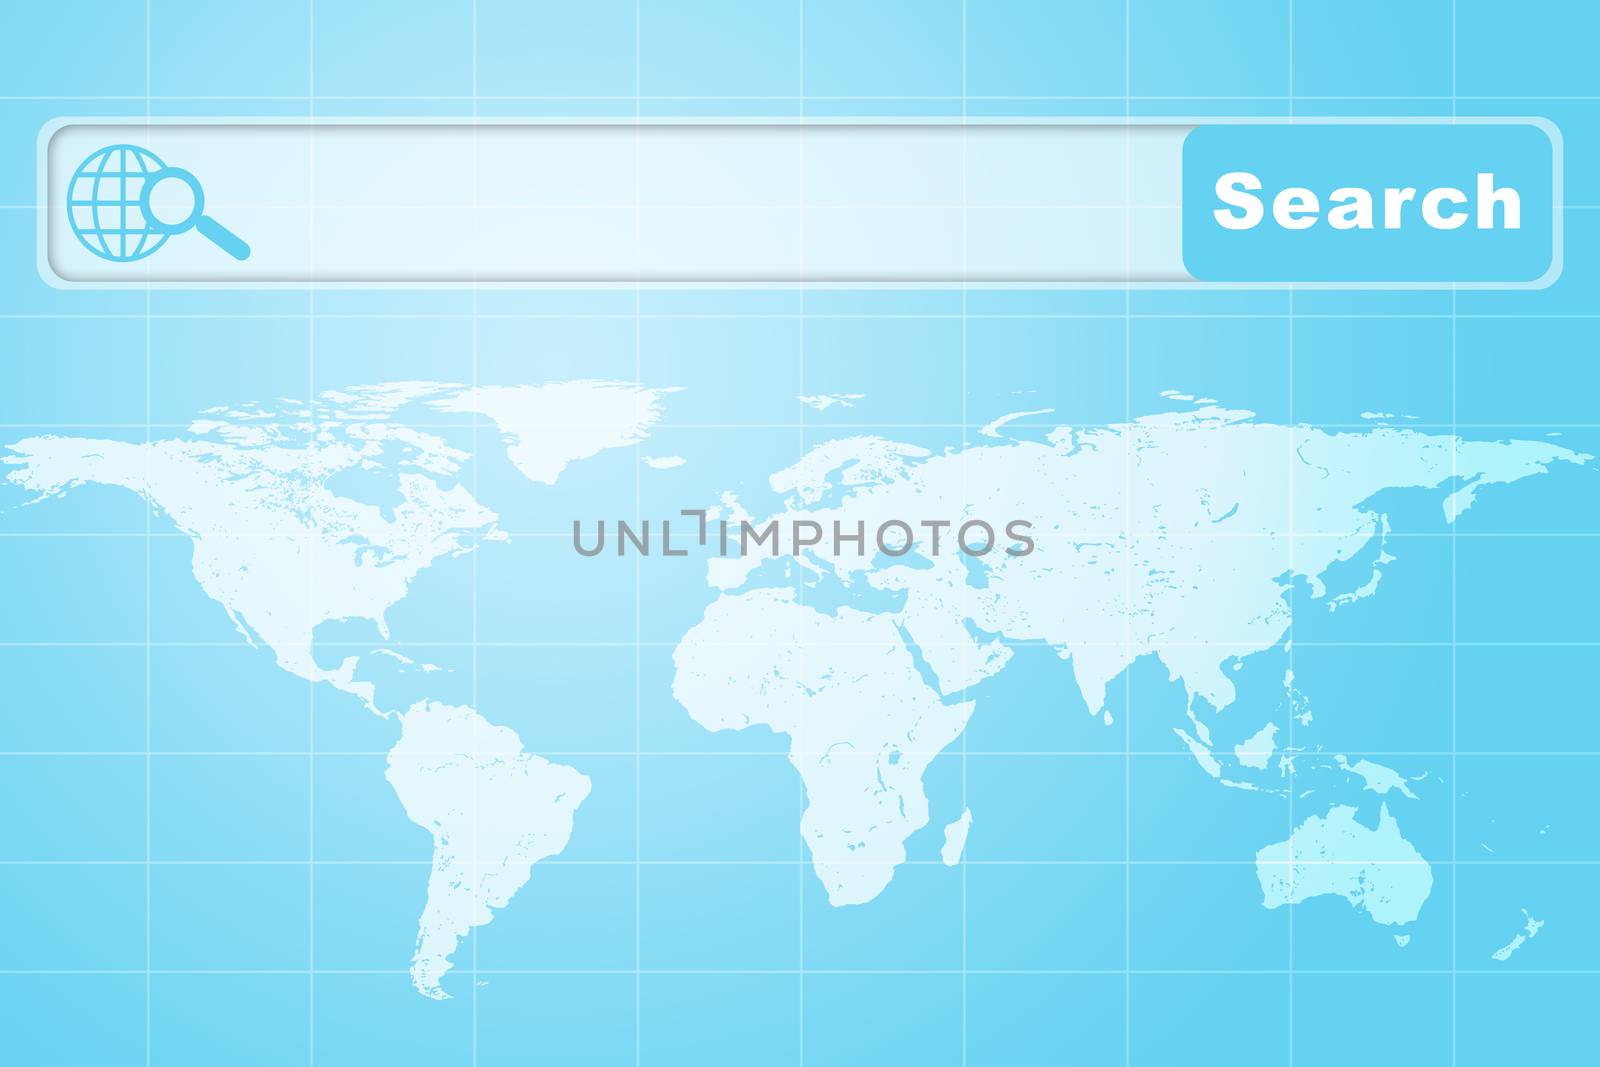 Abstract blue background with browser and world map